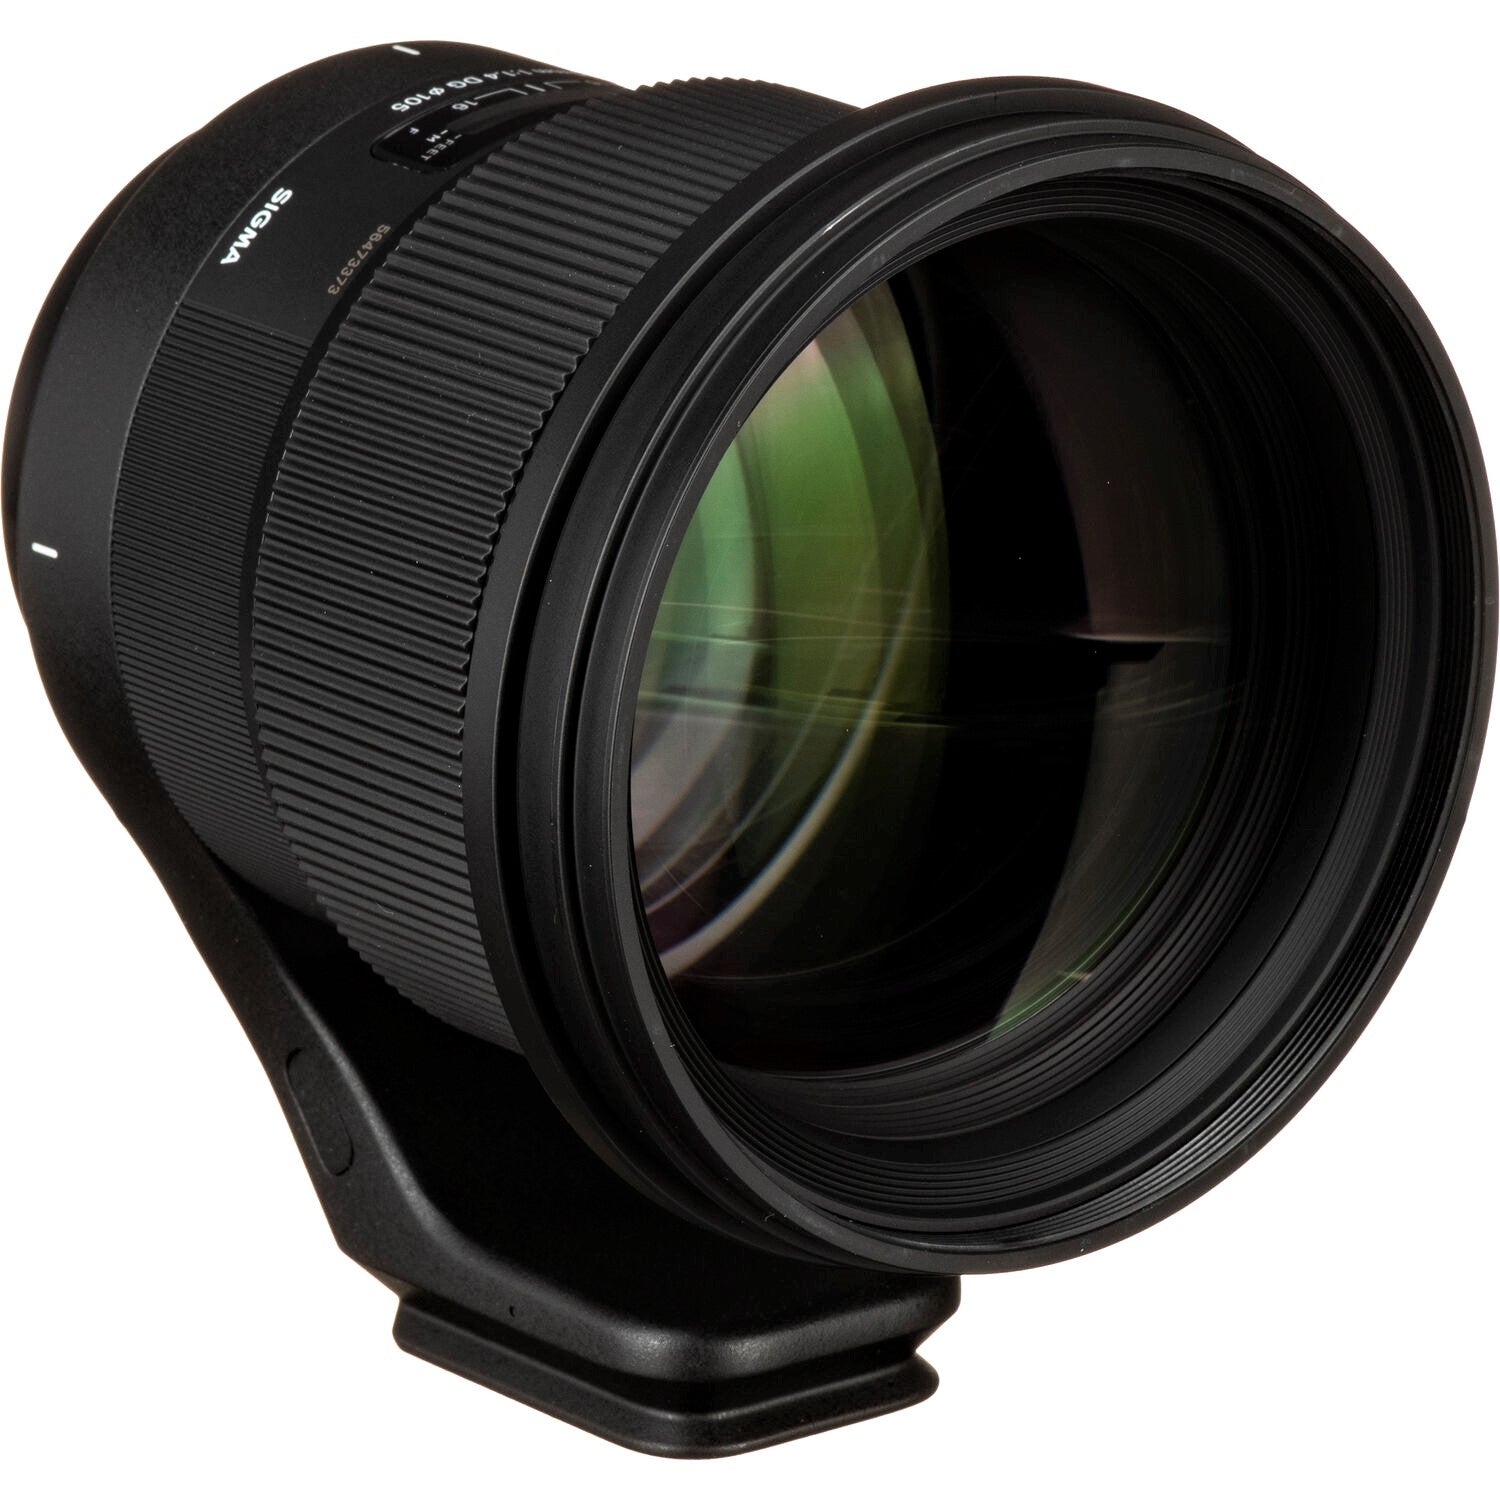 Sigma 105mm F1.4 DG HSM Art Lens for Nikon F in a Front-Side View